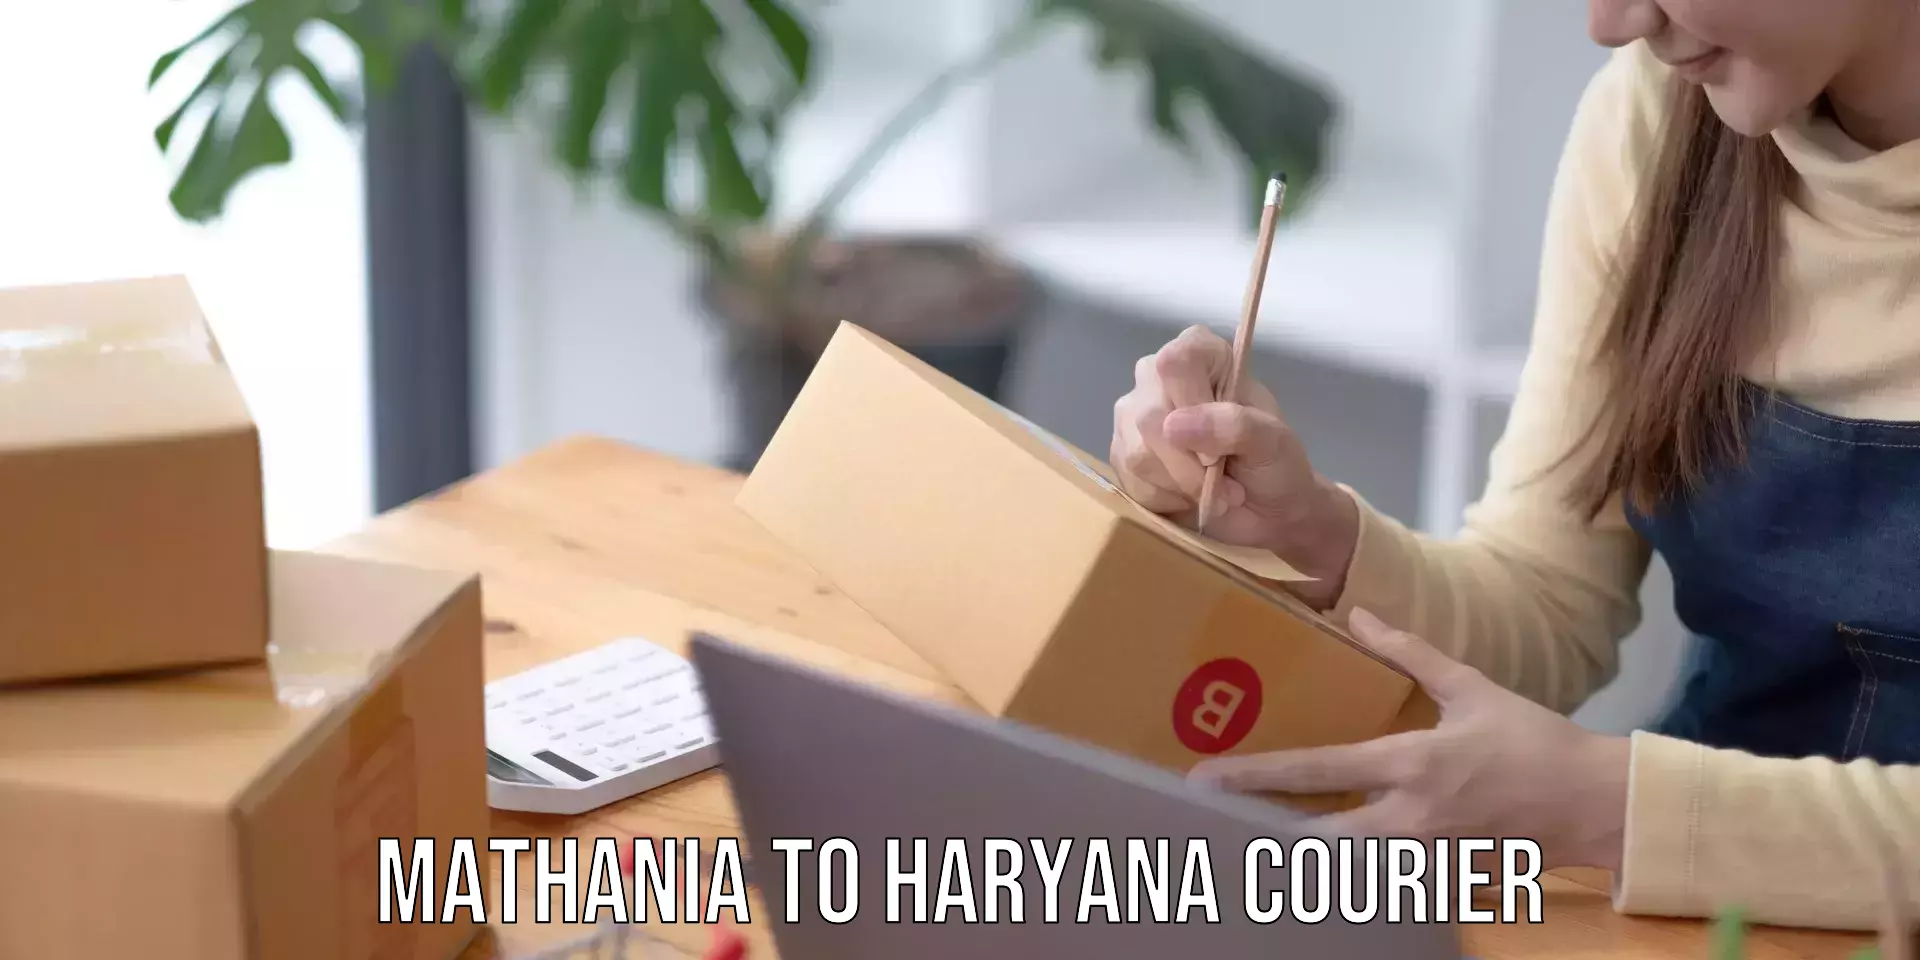 Courier service comparison Mathania to Haryana